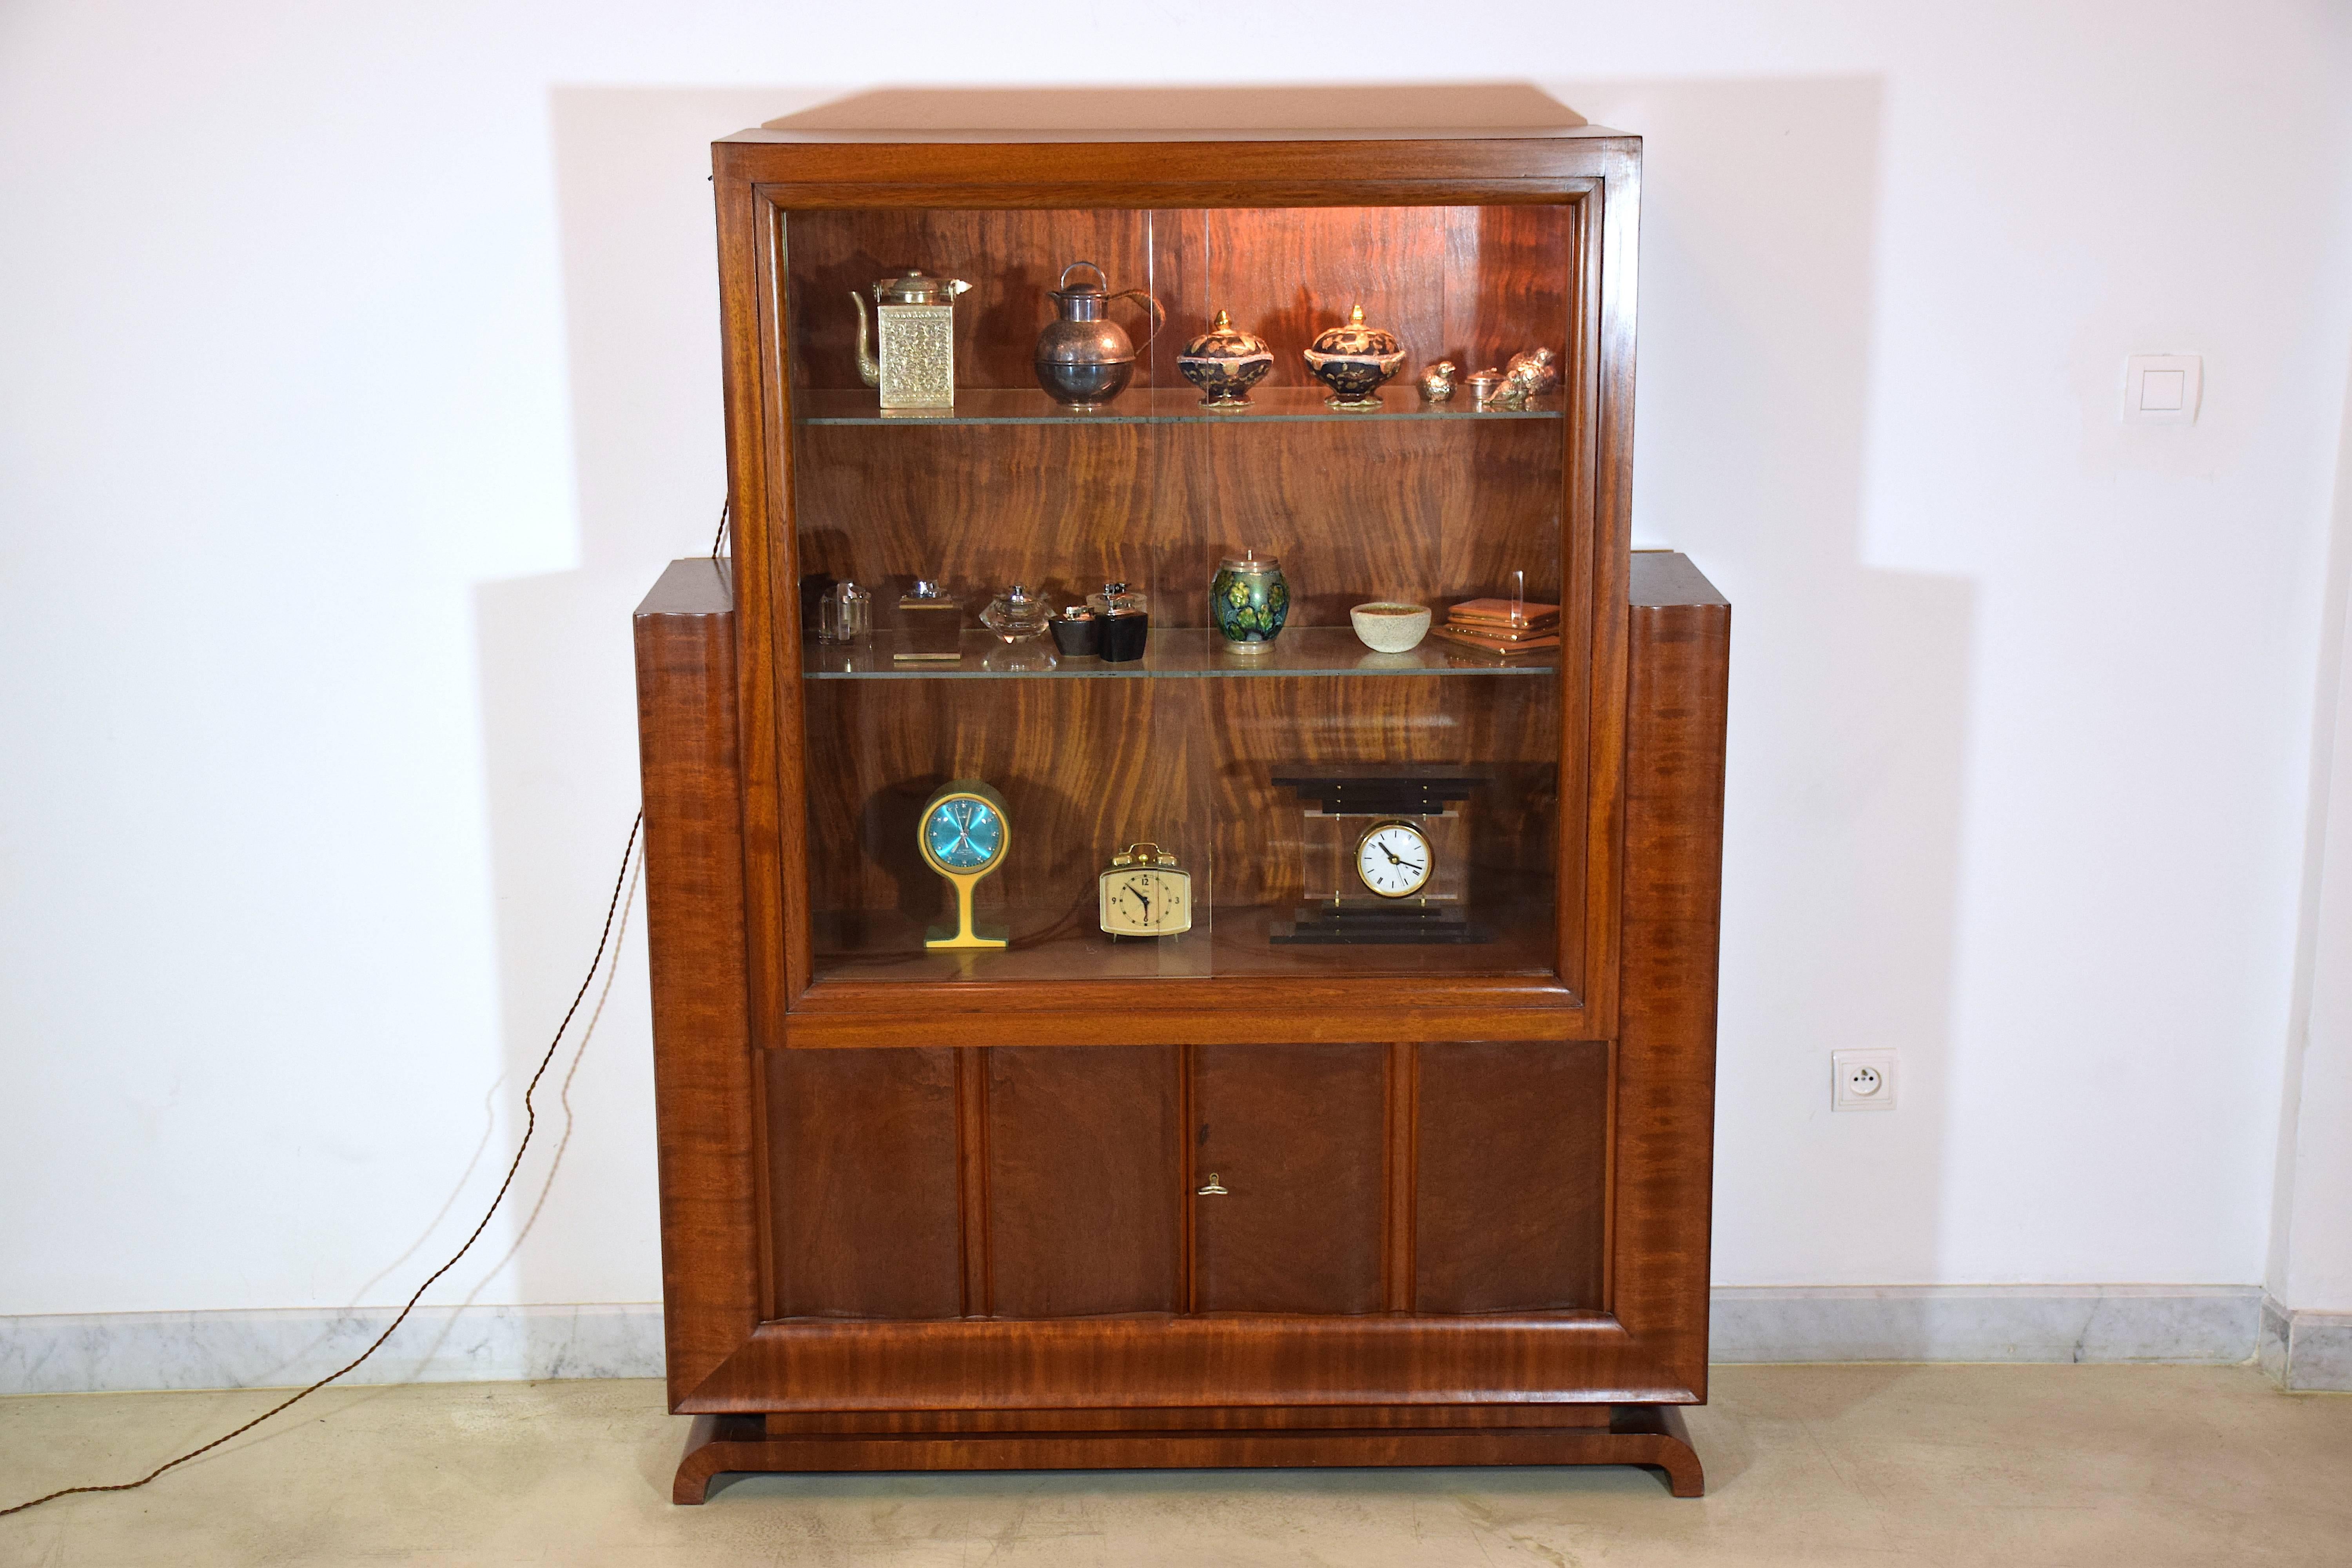  20th century vintage Art Deco light-up restored vitrine display cabinet composed of mahogany veneer, sliding glass doors and two glass shelves. The lower part is composed of a sideboard with one opening door and its original I key. 

The glass has